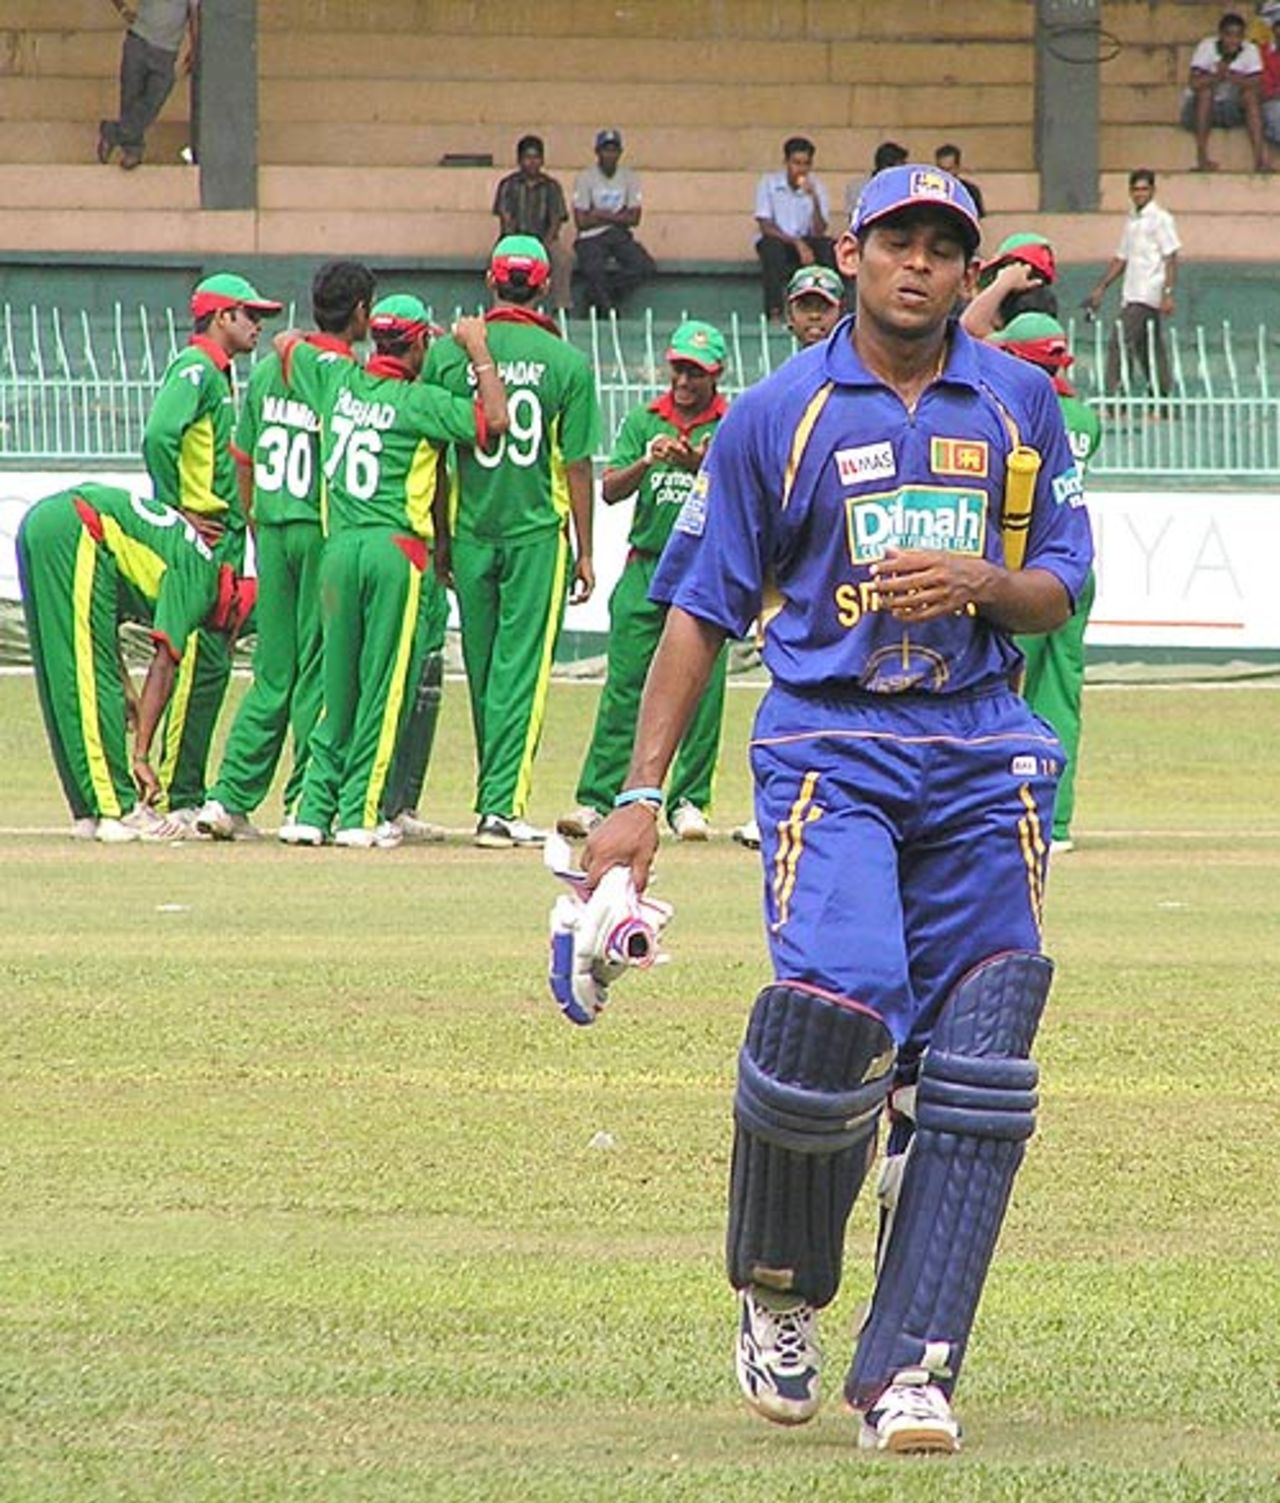 Tillakaratne Dilshan walks back after being dismissed by Mahmudullah for 39, Colombo, 3rd ODI, July 25, 2007